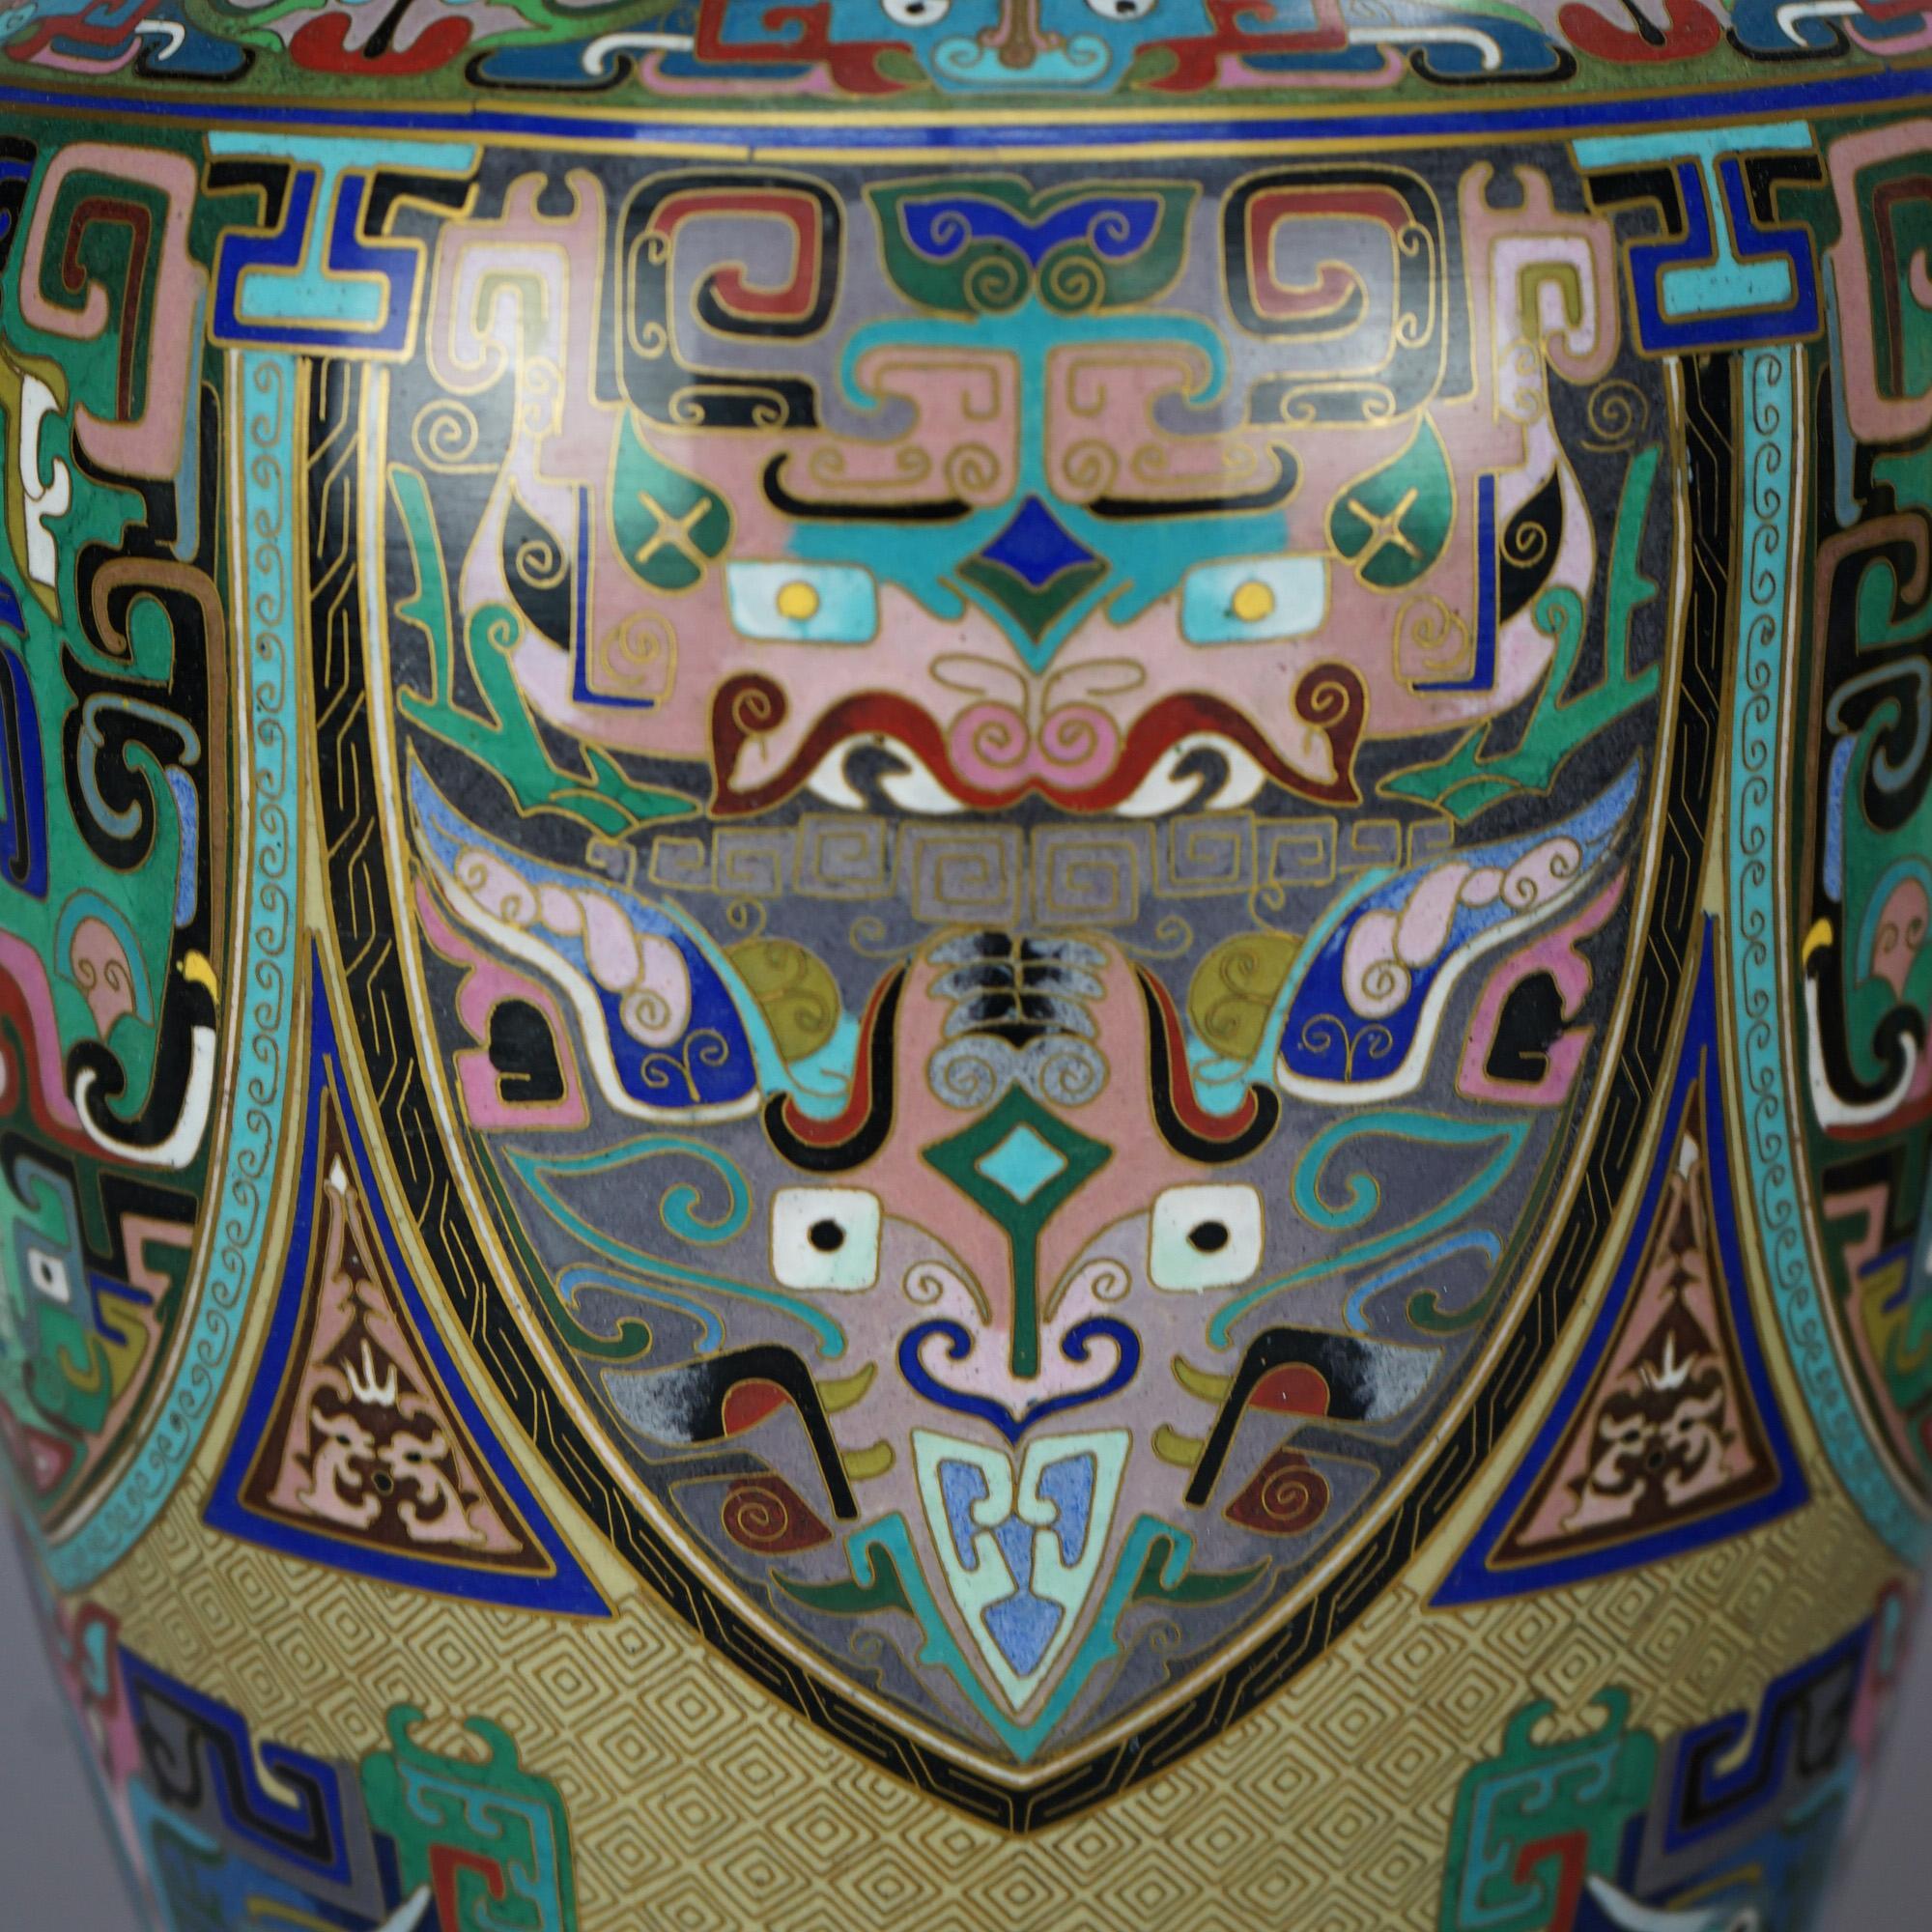 Metal Monumental Pair of Chinese Cloisonne Vases with Stylized Foliage & Animals 20thc